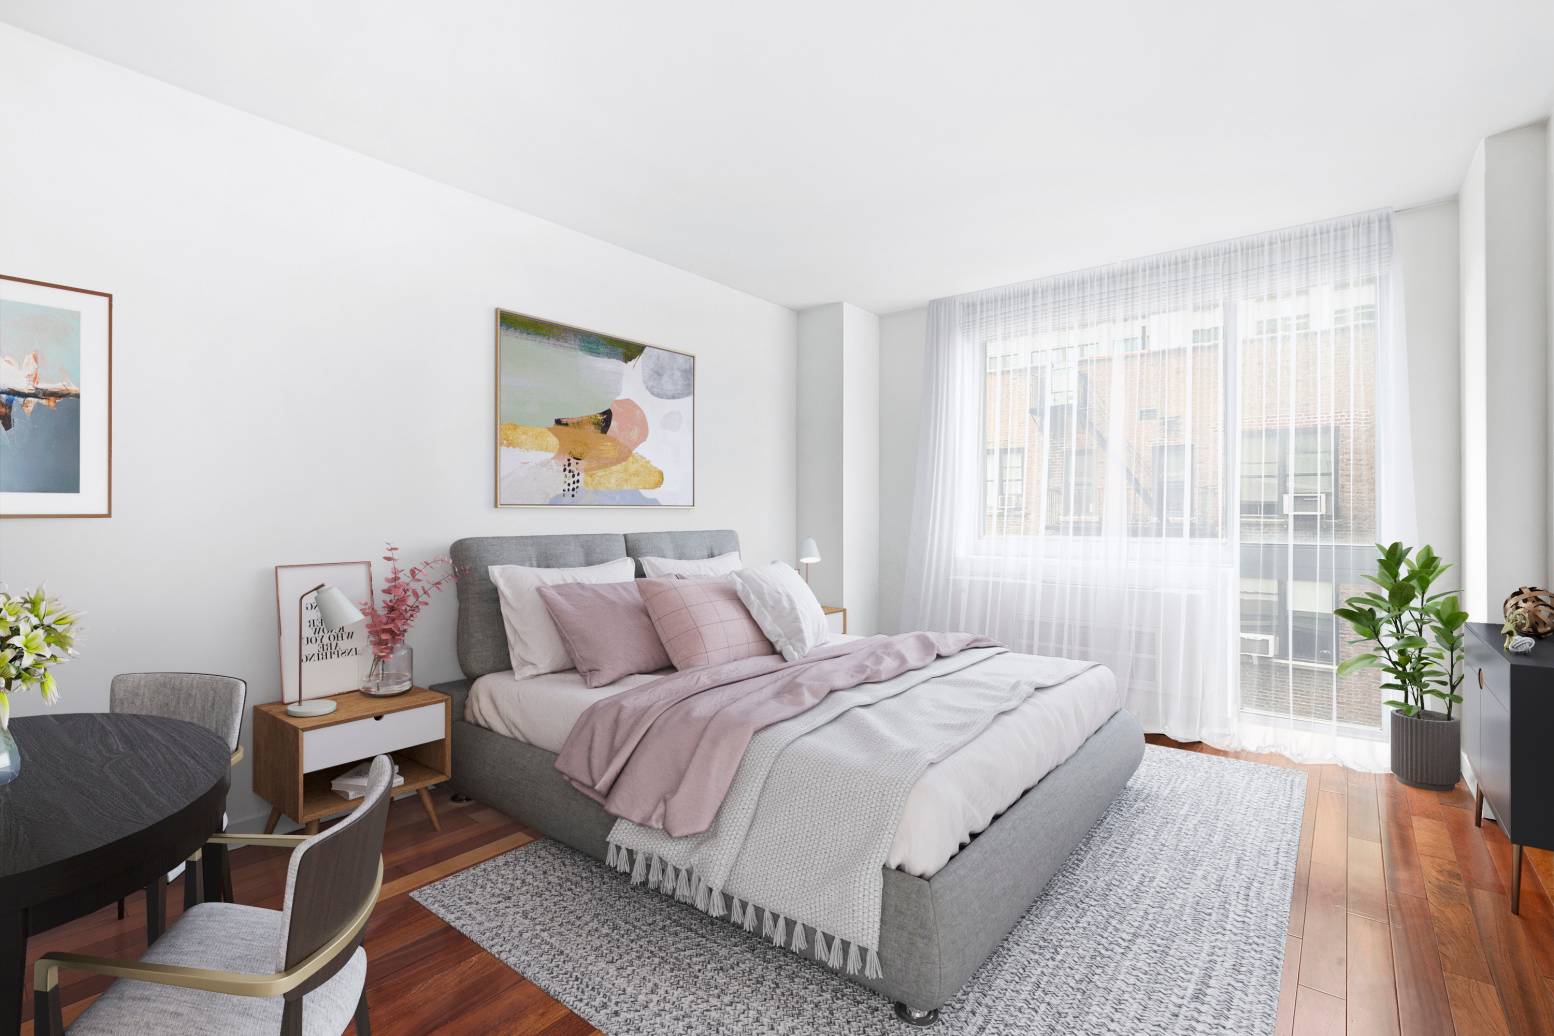 Luxurious South Facing Condo in Prime Flatiron Doorman, Fitness amp ; Amenities BuildingPrime Flatiron Gramercy Location South Facing Condo Studio Doorman amp ; Fitness Bldg Bright apartment with Southern exposure ...